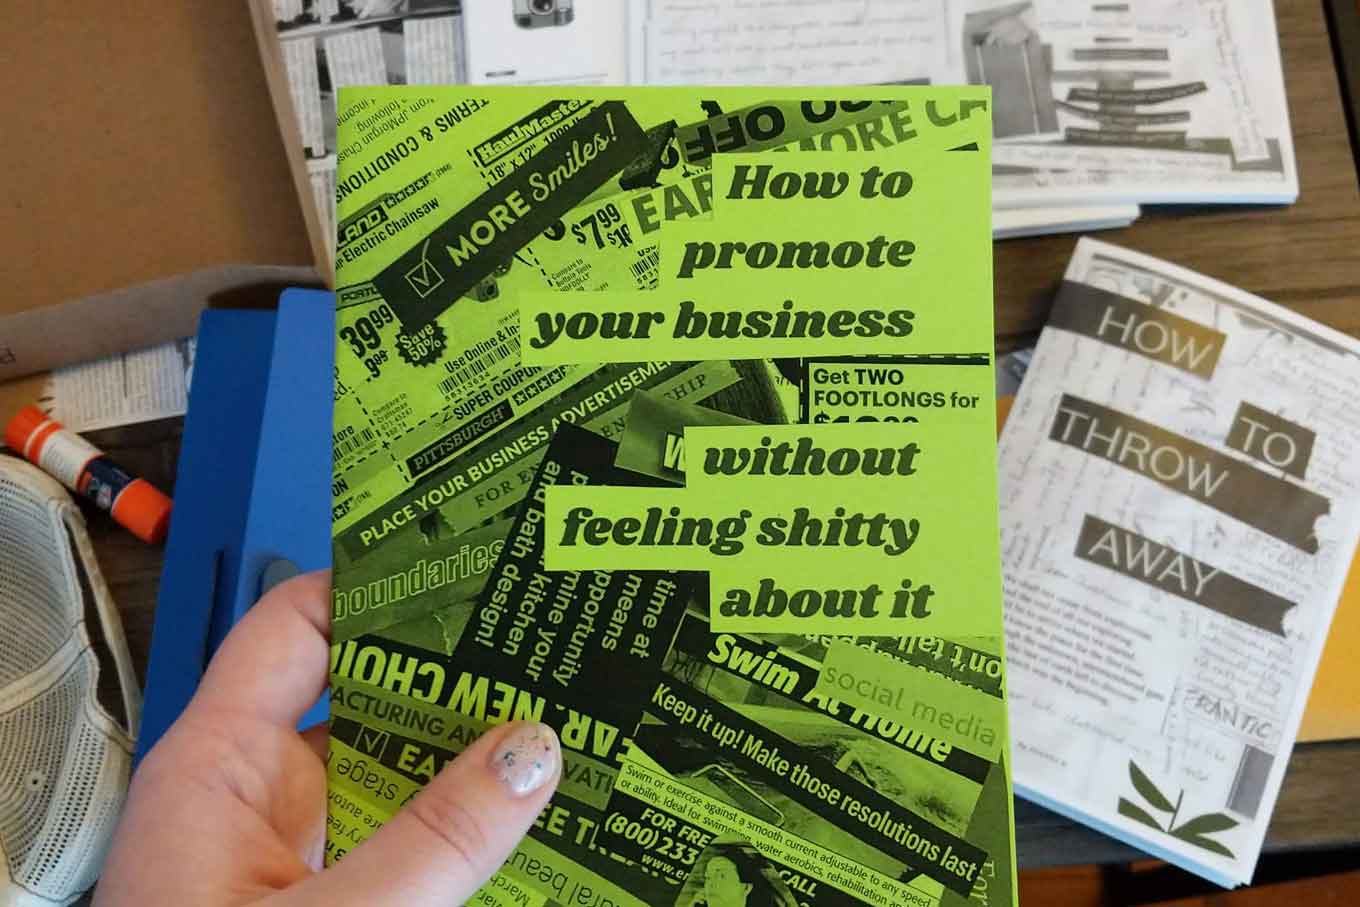 A hand holds up a copy of the zine: "How To Promote Your Business Without Feeling Shitty About It."